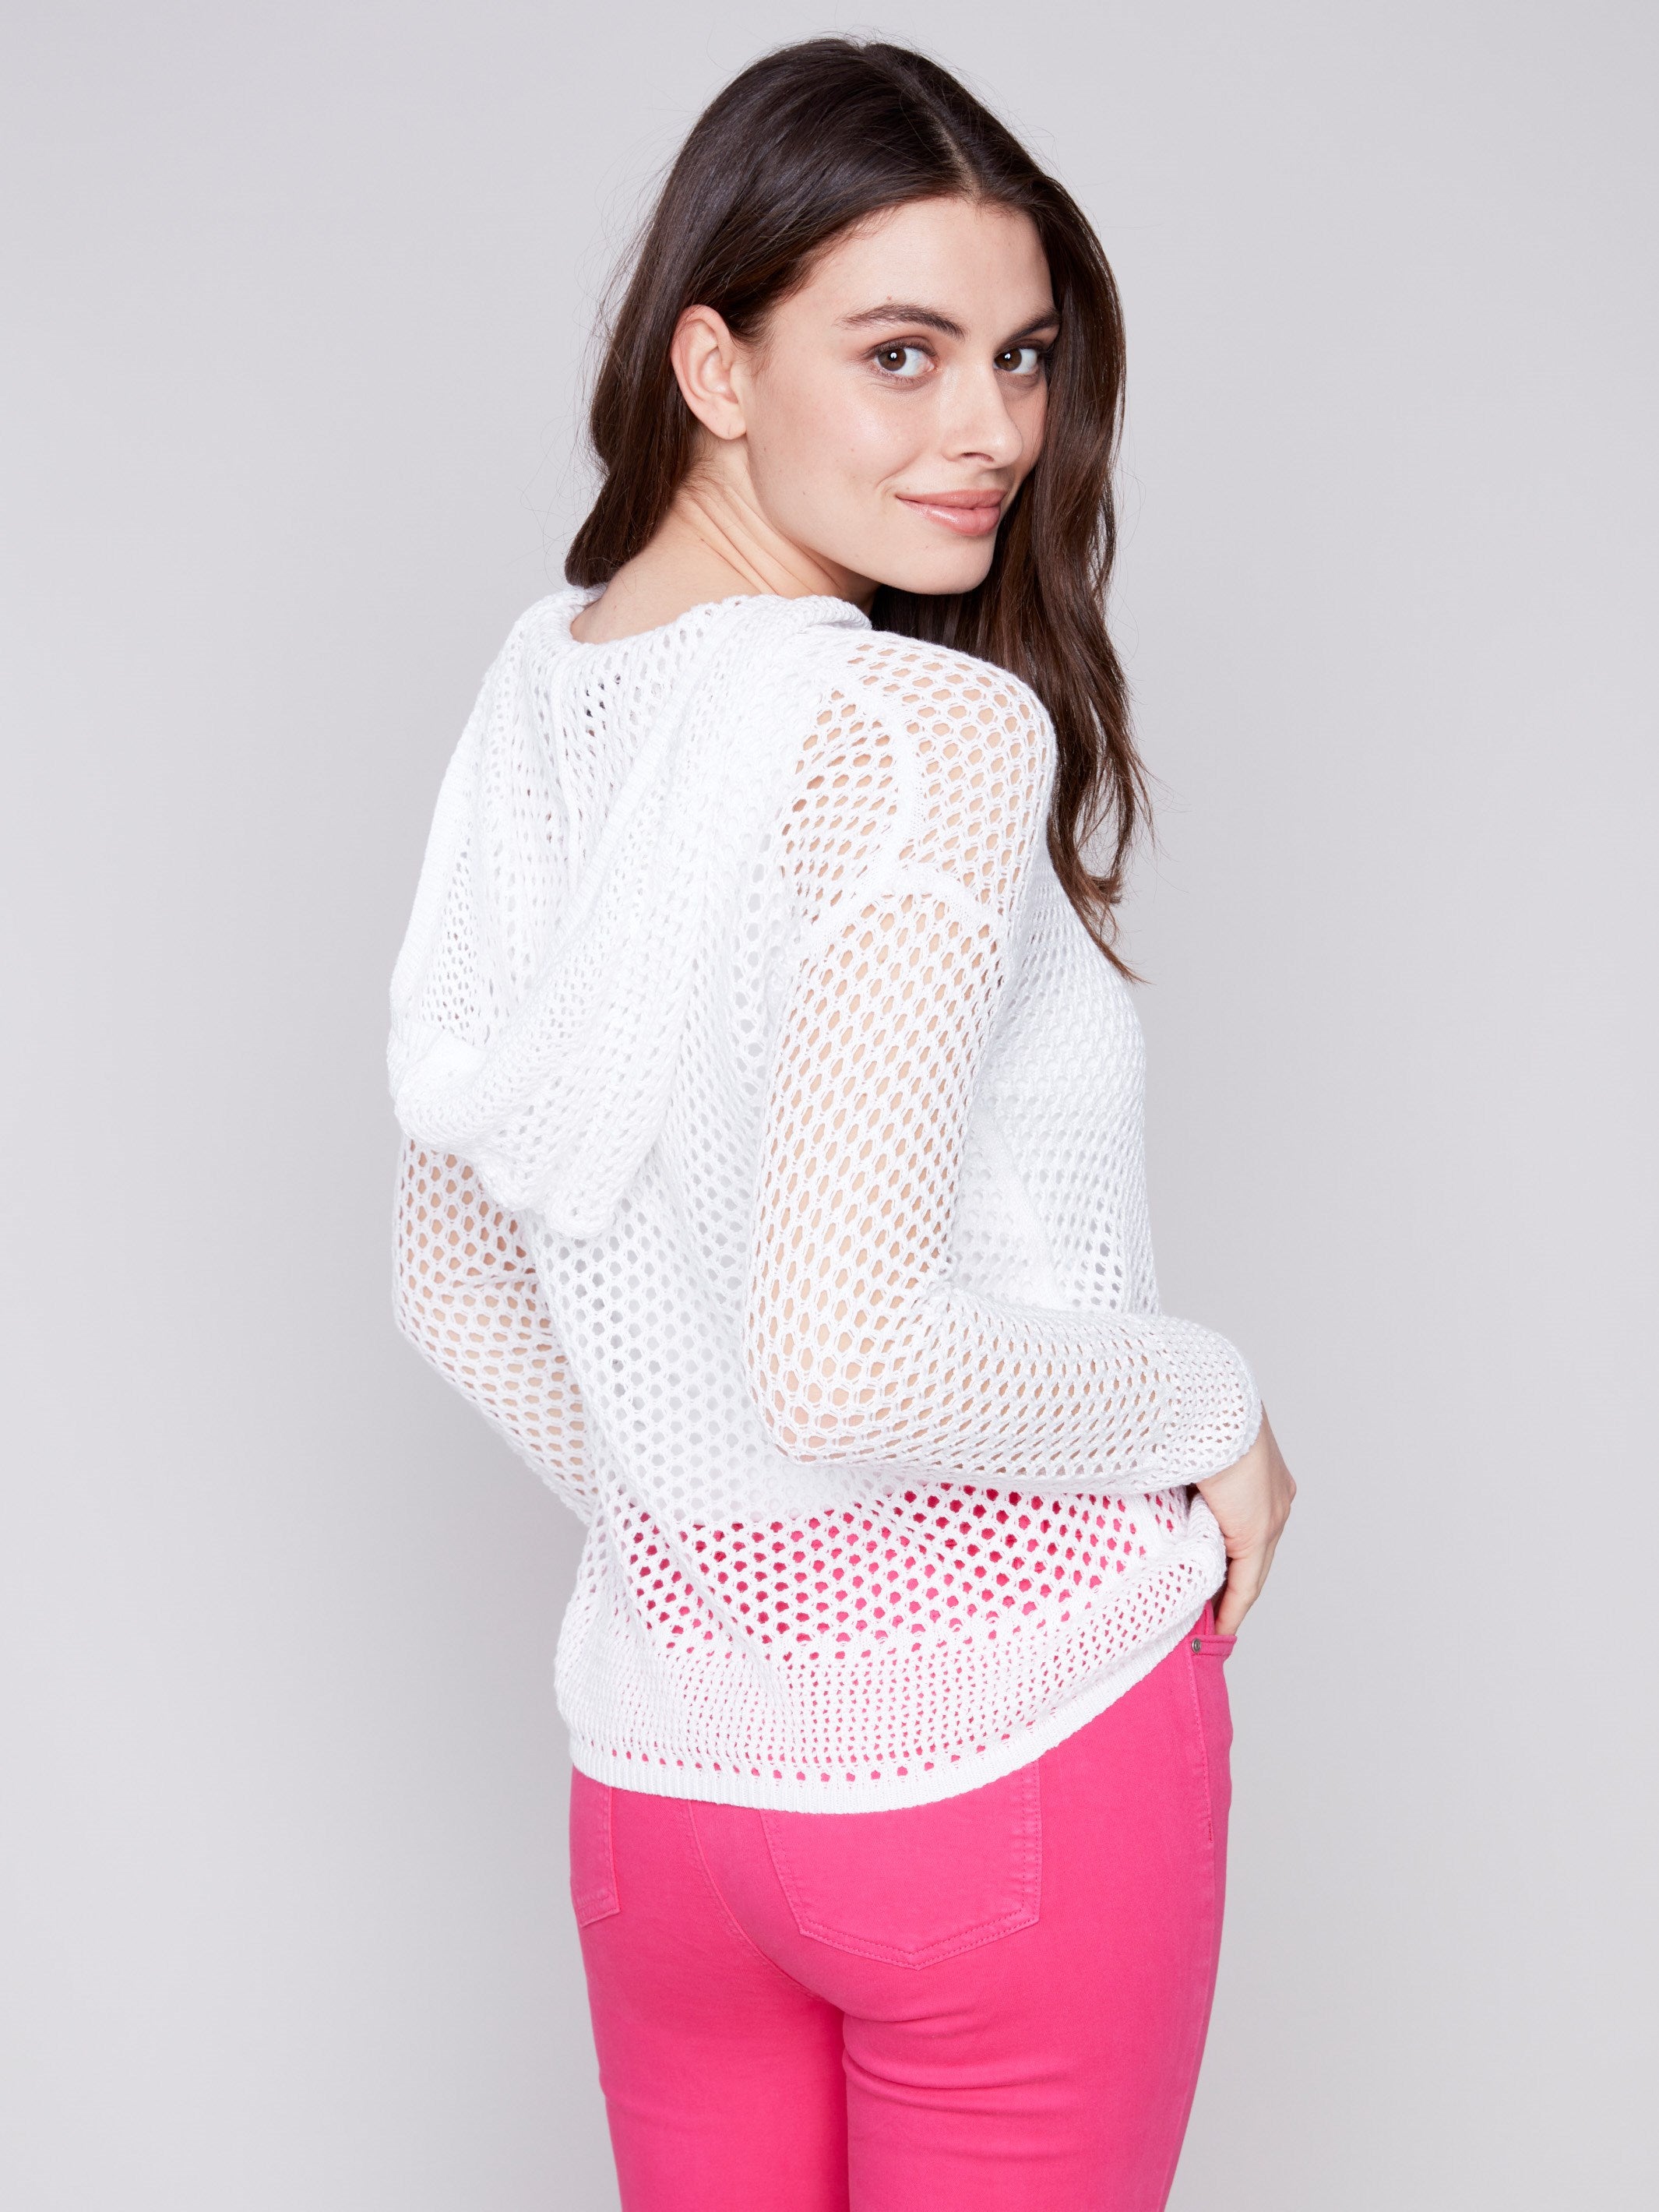 Fishnet Crochet Hoodie Sweater - White - Charlie B Collection Canada - Image 2